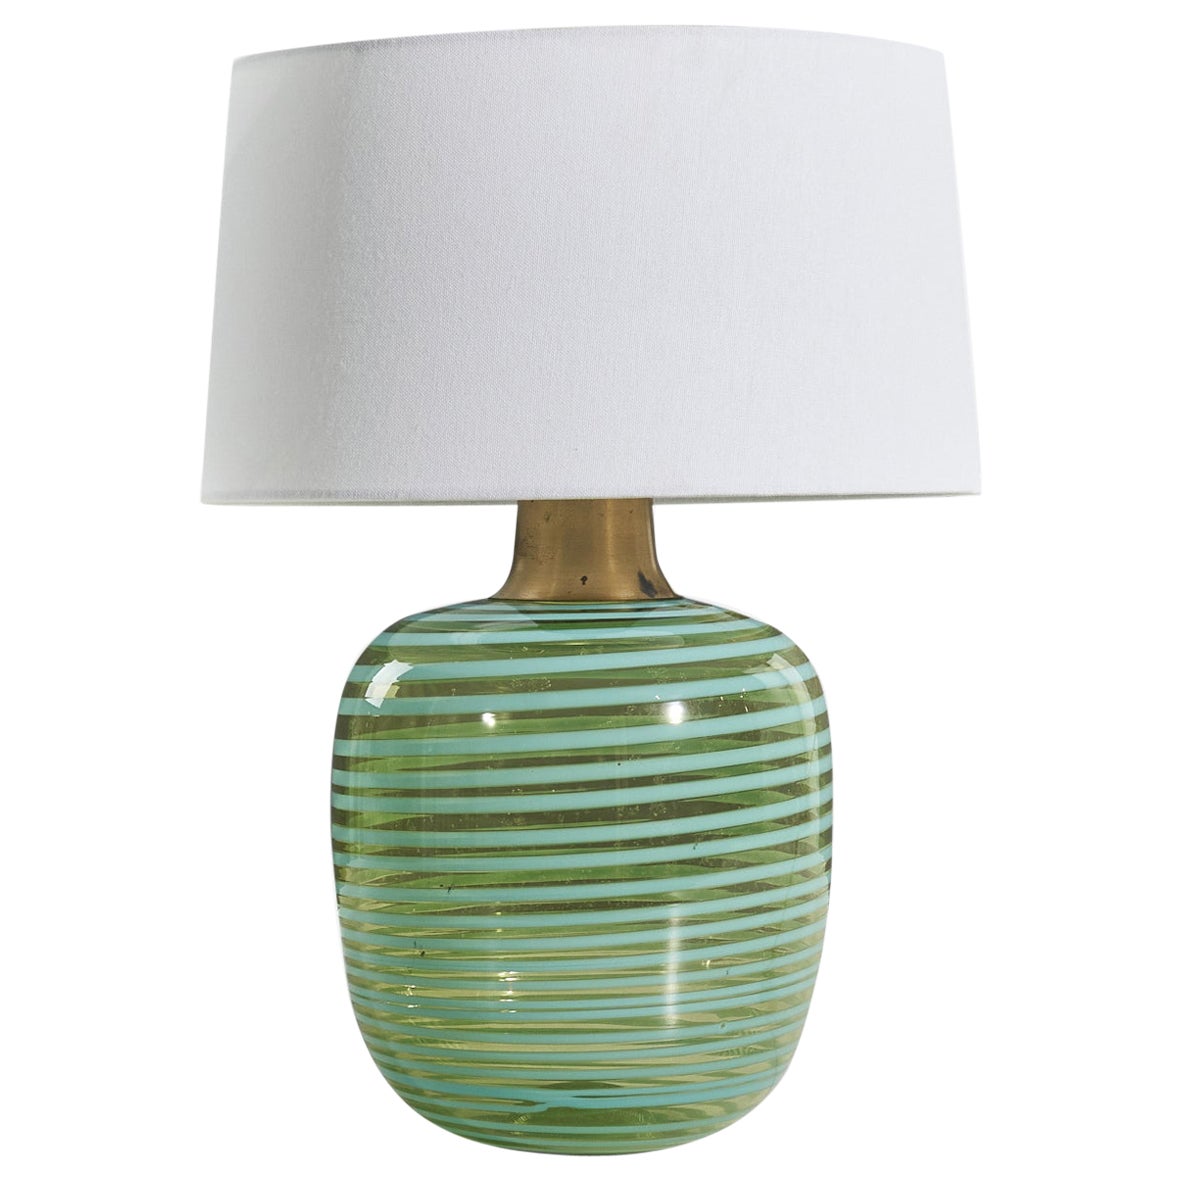 Italian Designer, Table Lamp, Brass, Blue And Green Glass, Italy, 1970s For Sale